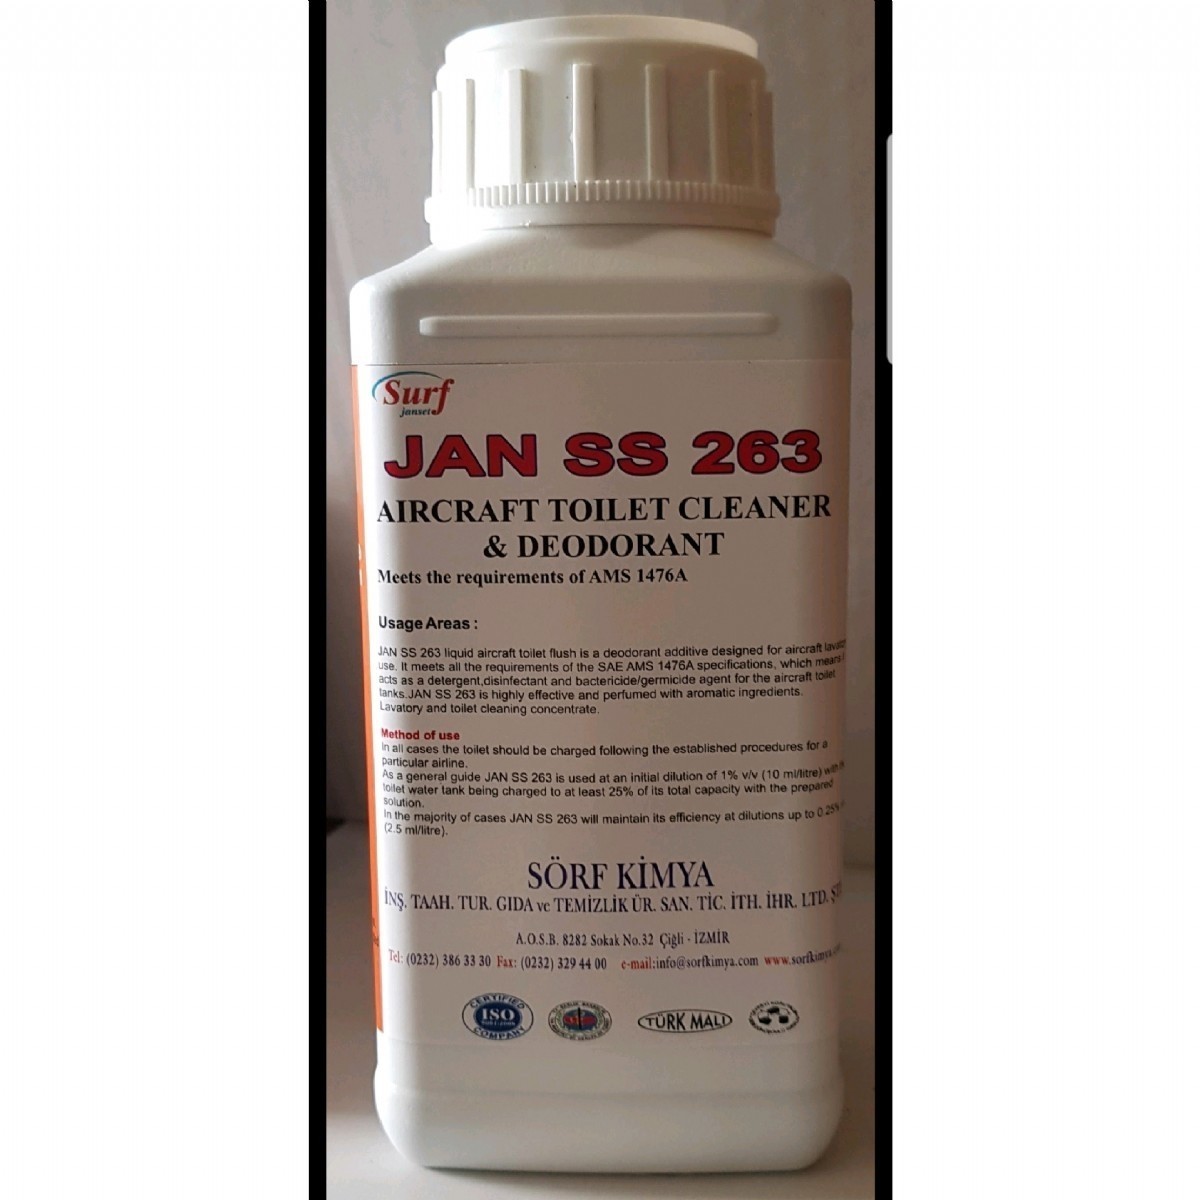 TOILET HYGIENE | JAN SS 263 AIRCRAFT TOILET DEODORANT,SANITIZER AND CLEANER AMS 1476B SKU11963  | 38 | aircraft, aircraft, ams, ardrox, chemetal, imcaero, surfchemistry, nsn, nato, military, boeing, falcon, airbus, helicopter, control, toilet, hygiene, JAN SS 263 AIRCRAFT TOILET DEODORANT, SANITIZER AND CLEANER AMS 1476B SKU11963  | 